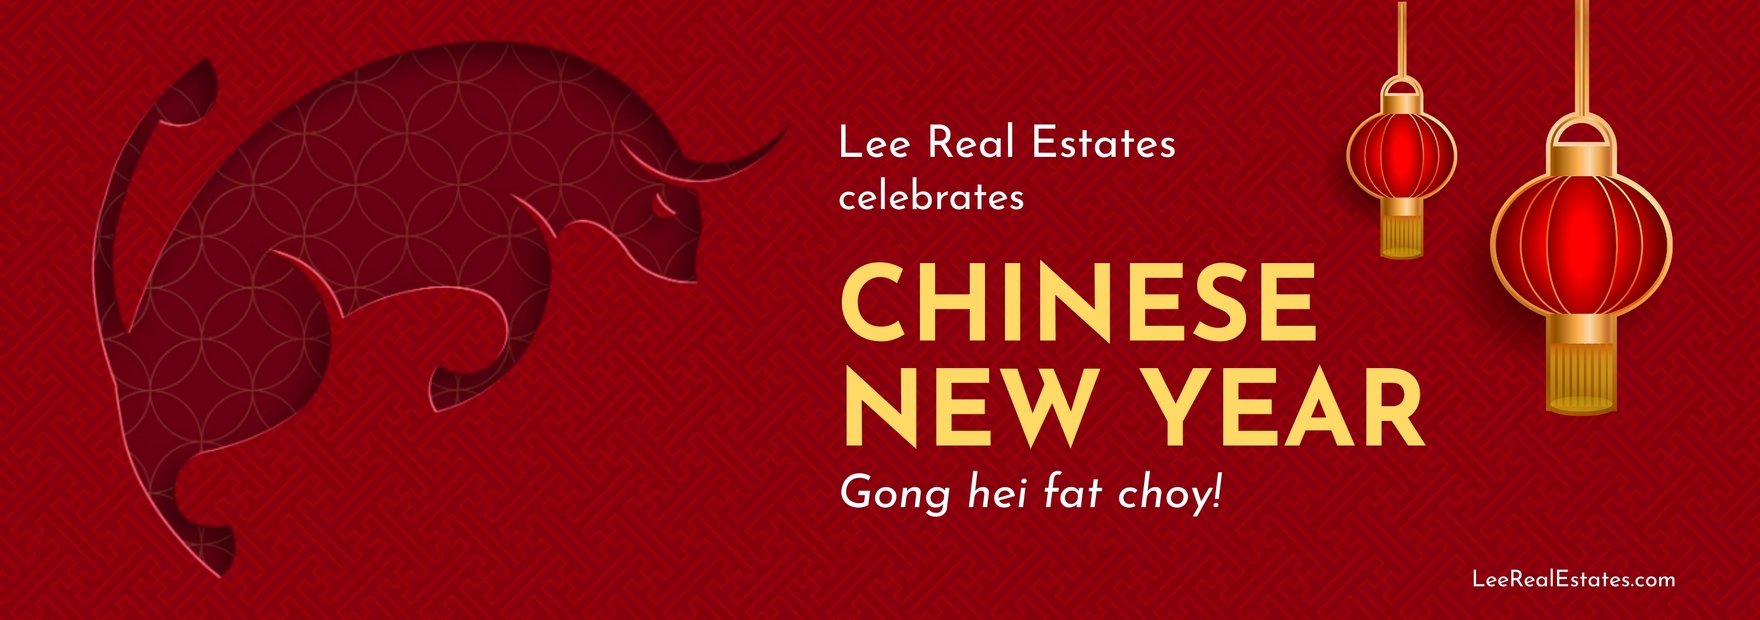 Free Chinese New Year Tumblr Banner Template